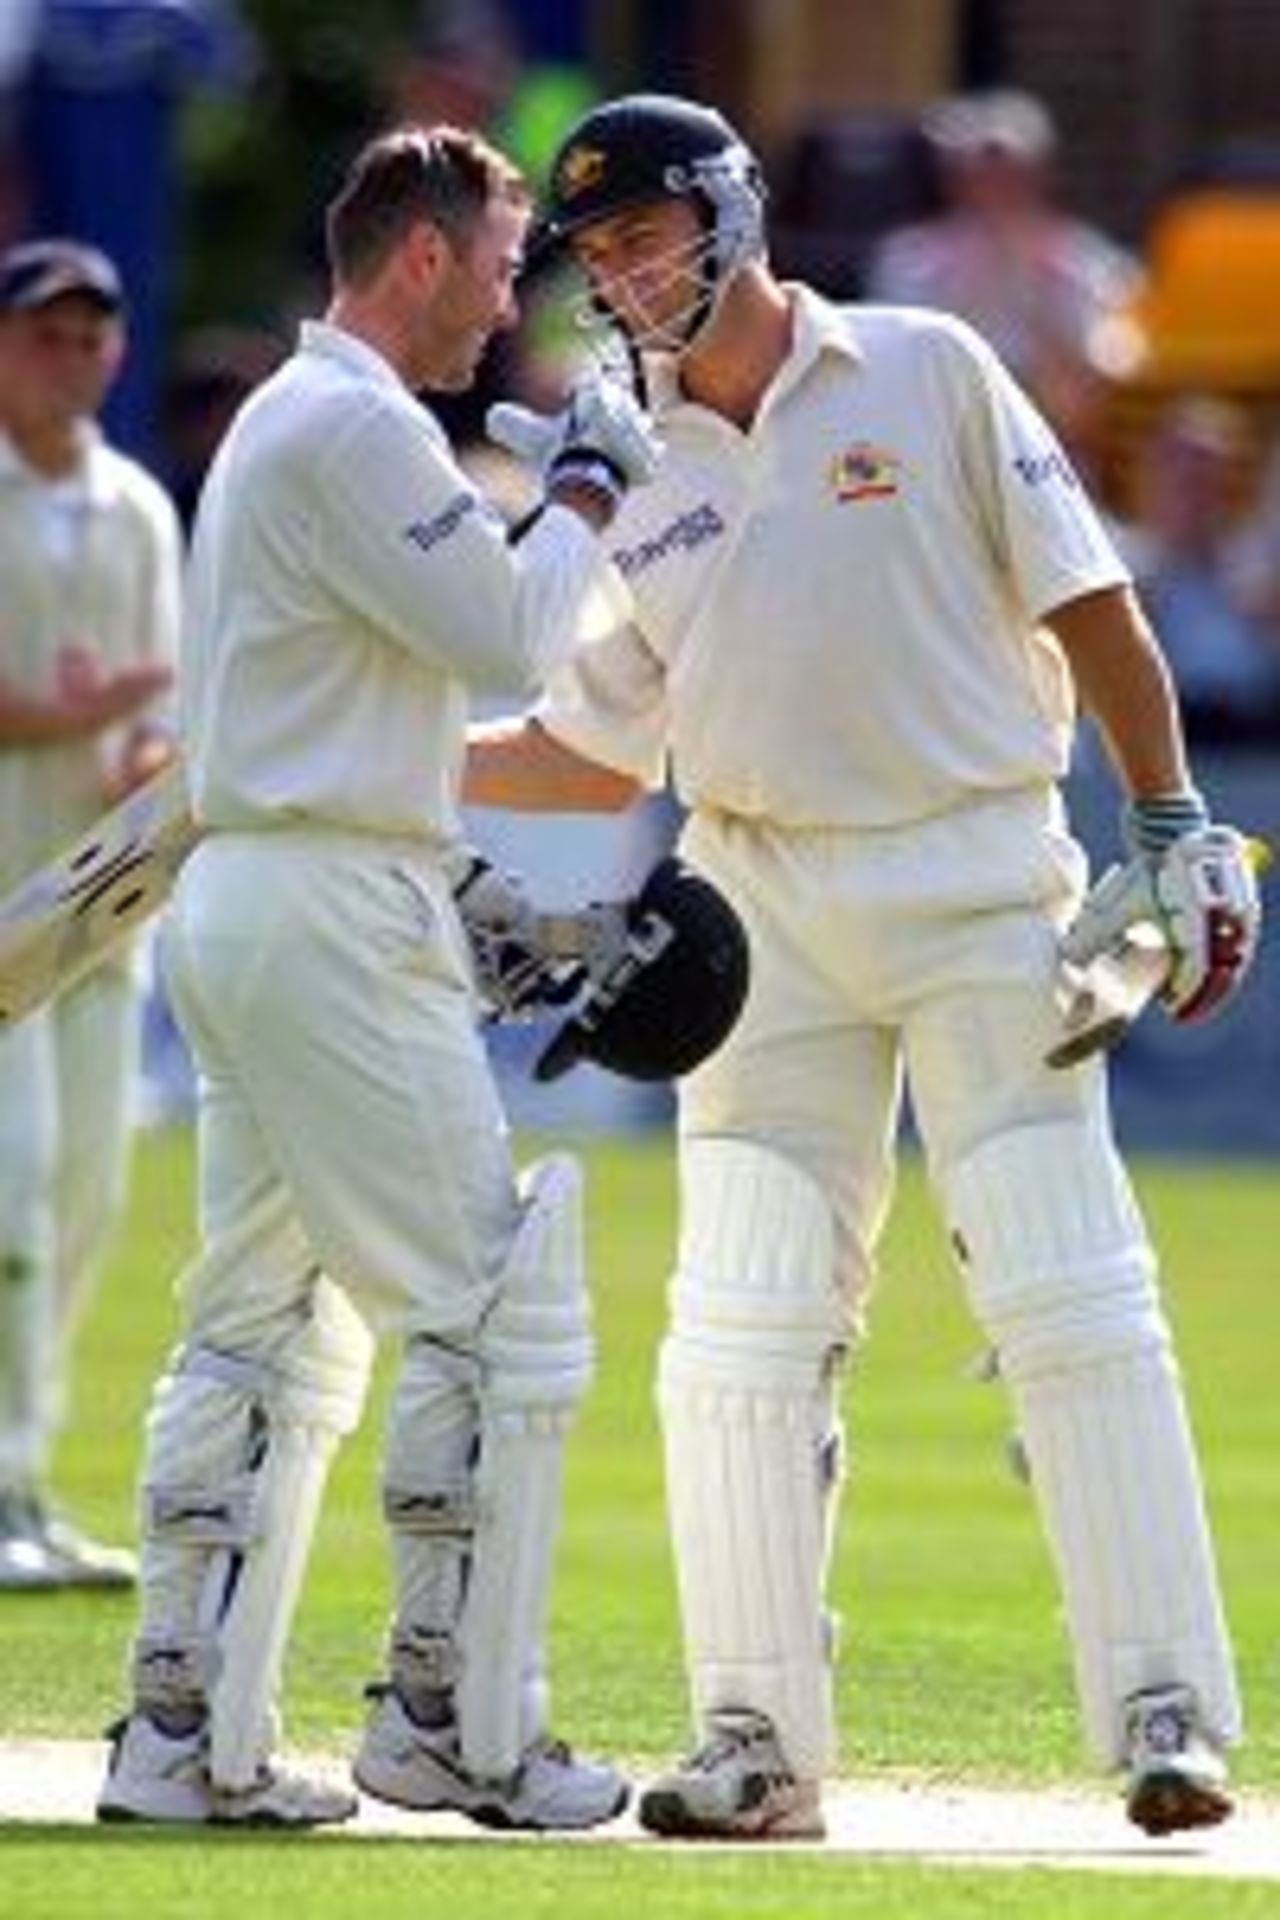 Damien Martyn of Australia [left] is congratulated by Adam Gilchrist after both players score centuries on the first day of the Vodafone Challenge match betwen Essex and Australia at the County Ground, Chelmsford.